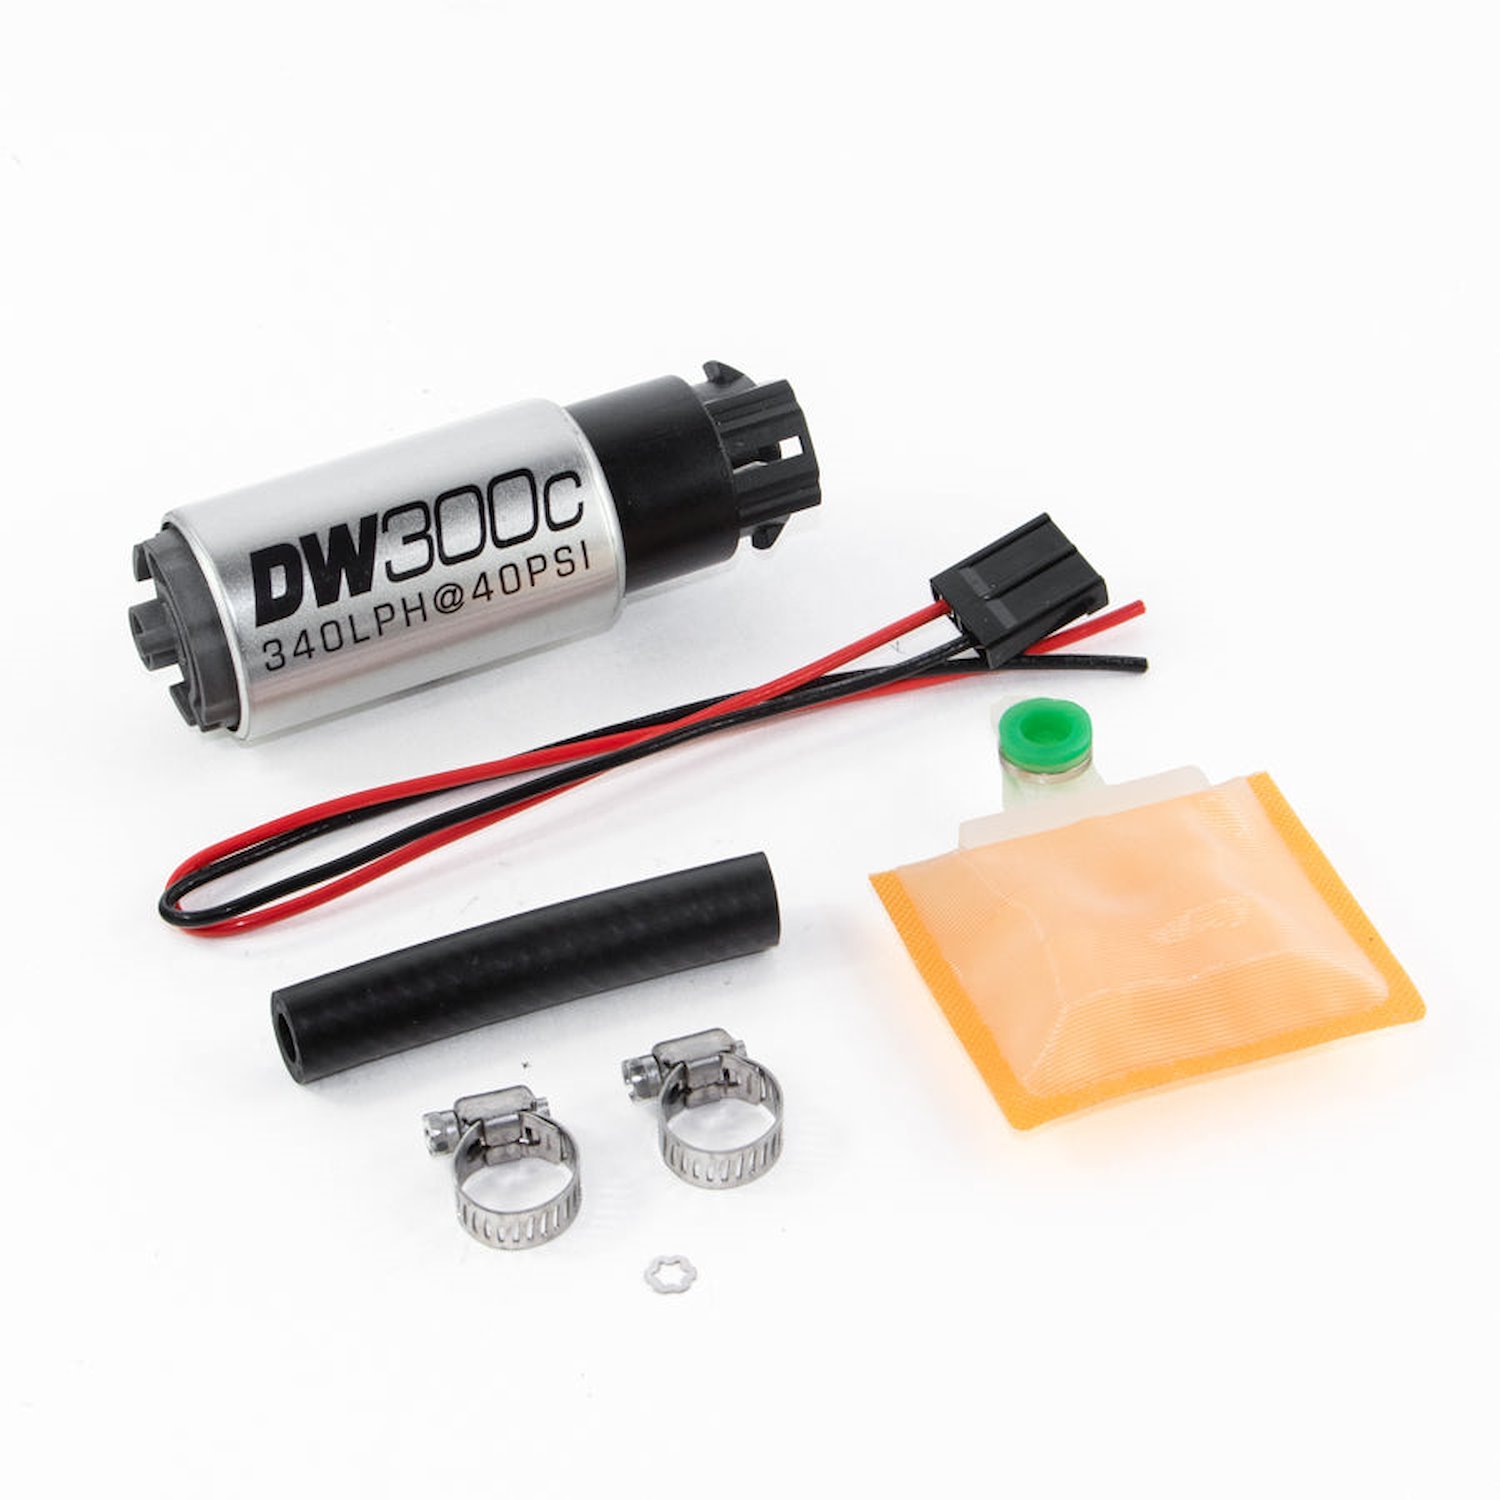 93091000 DW300C series 340lph compact fuel pump w/ mounting clips w/ Universal Install Kit.